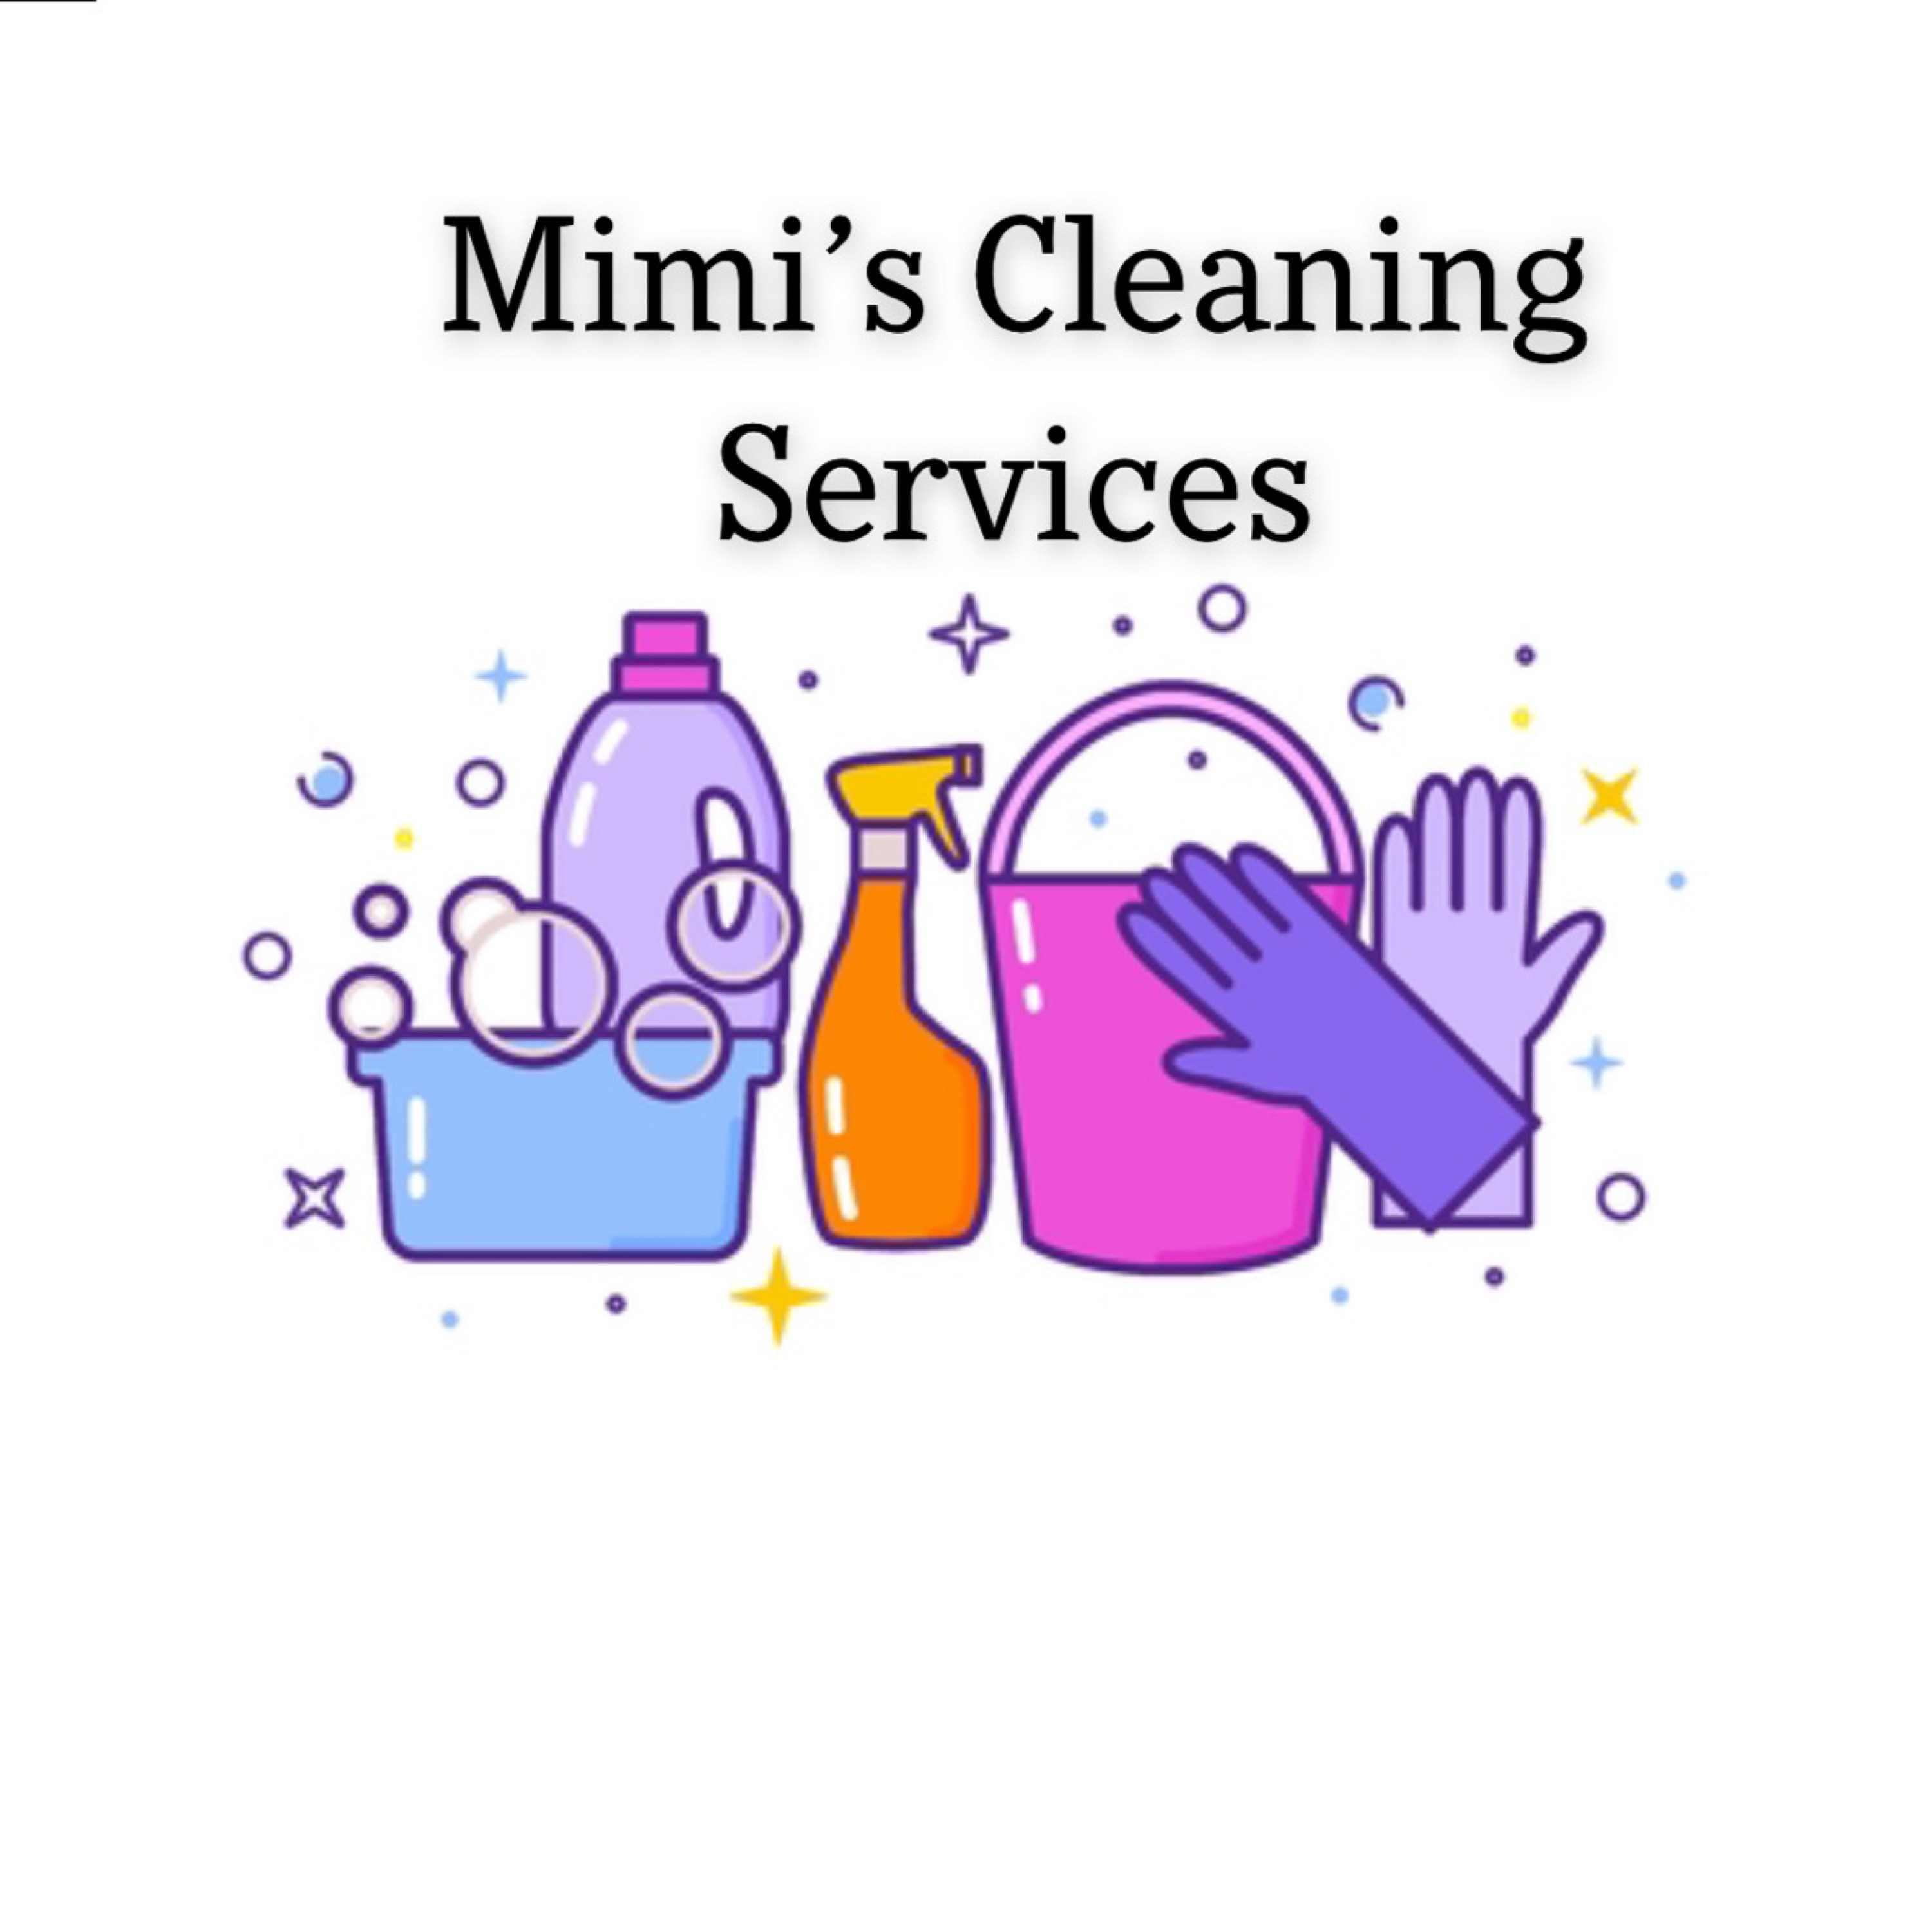 Mimi's Cleaning Services Logo